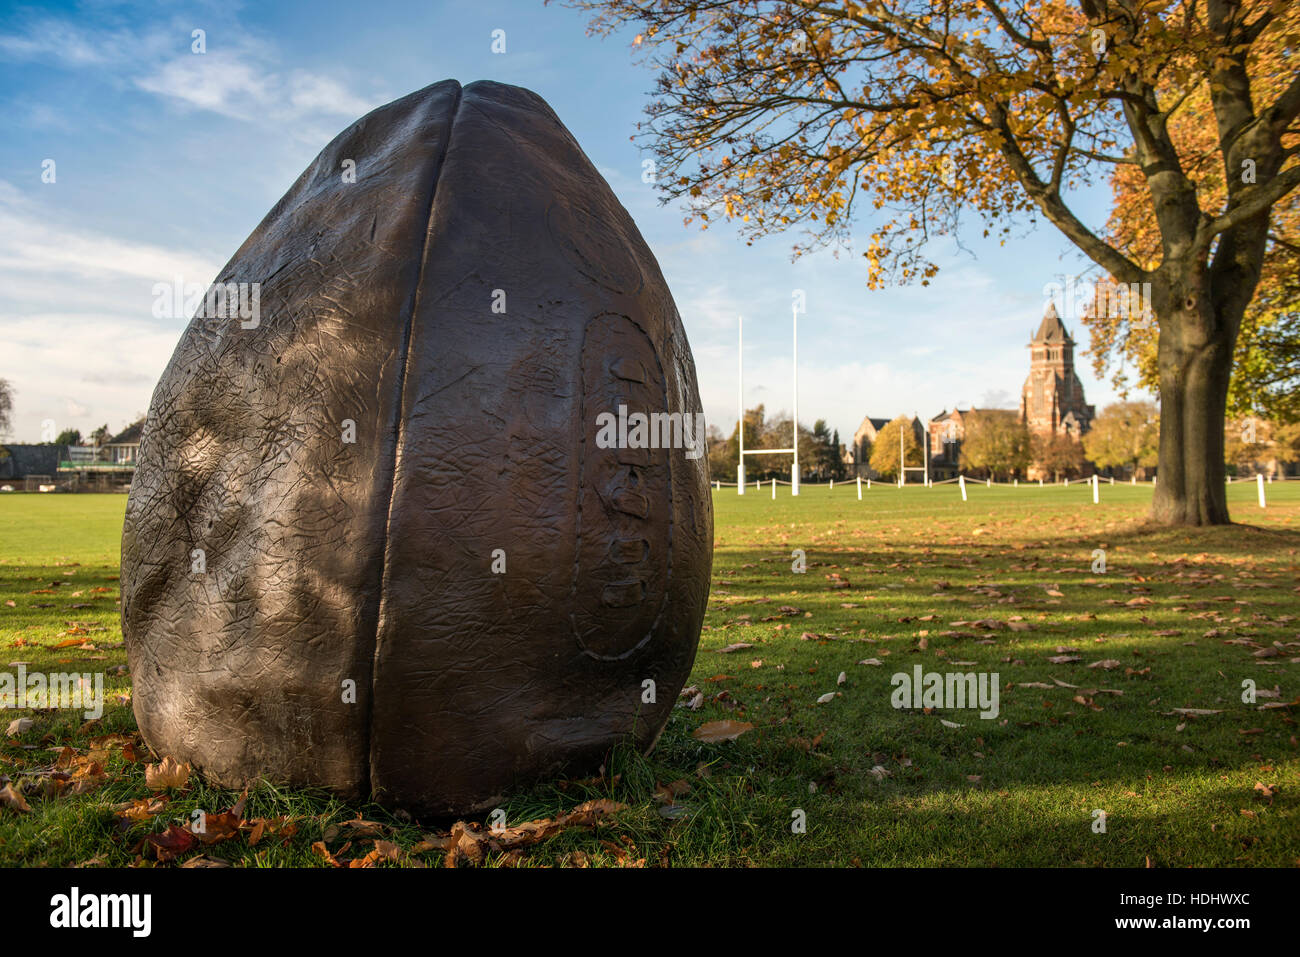 The giant vintage rugby ball, a monument to the birthplace of the game at Rugby School, Warwickshire UK Stock Photo